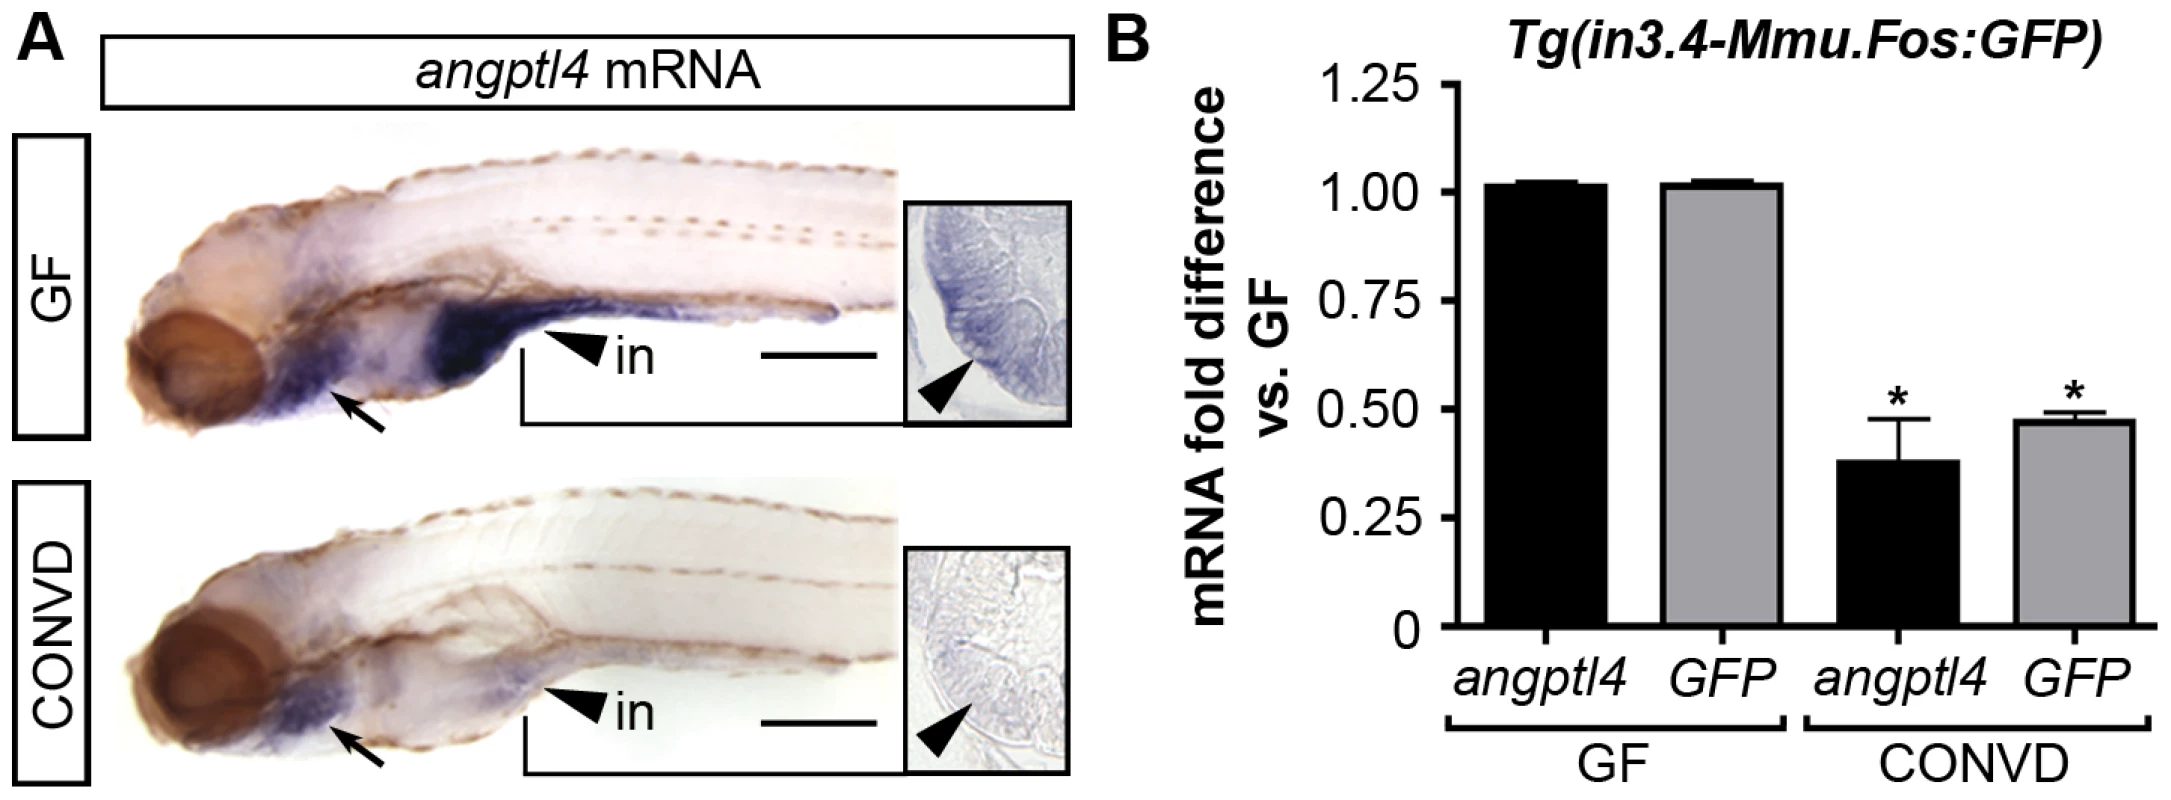 The intestinal module in3.4 recapitulates microbial suppression of <i>angptl4</i>.